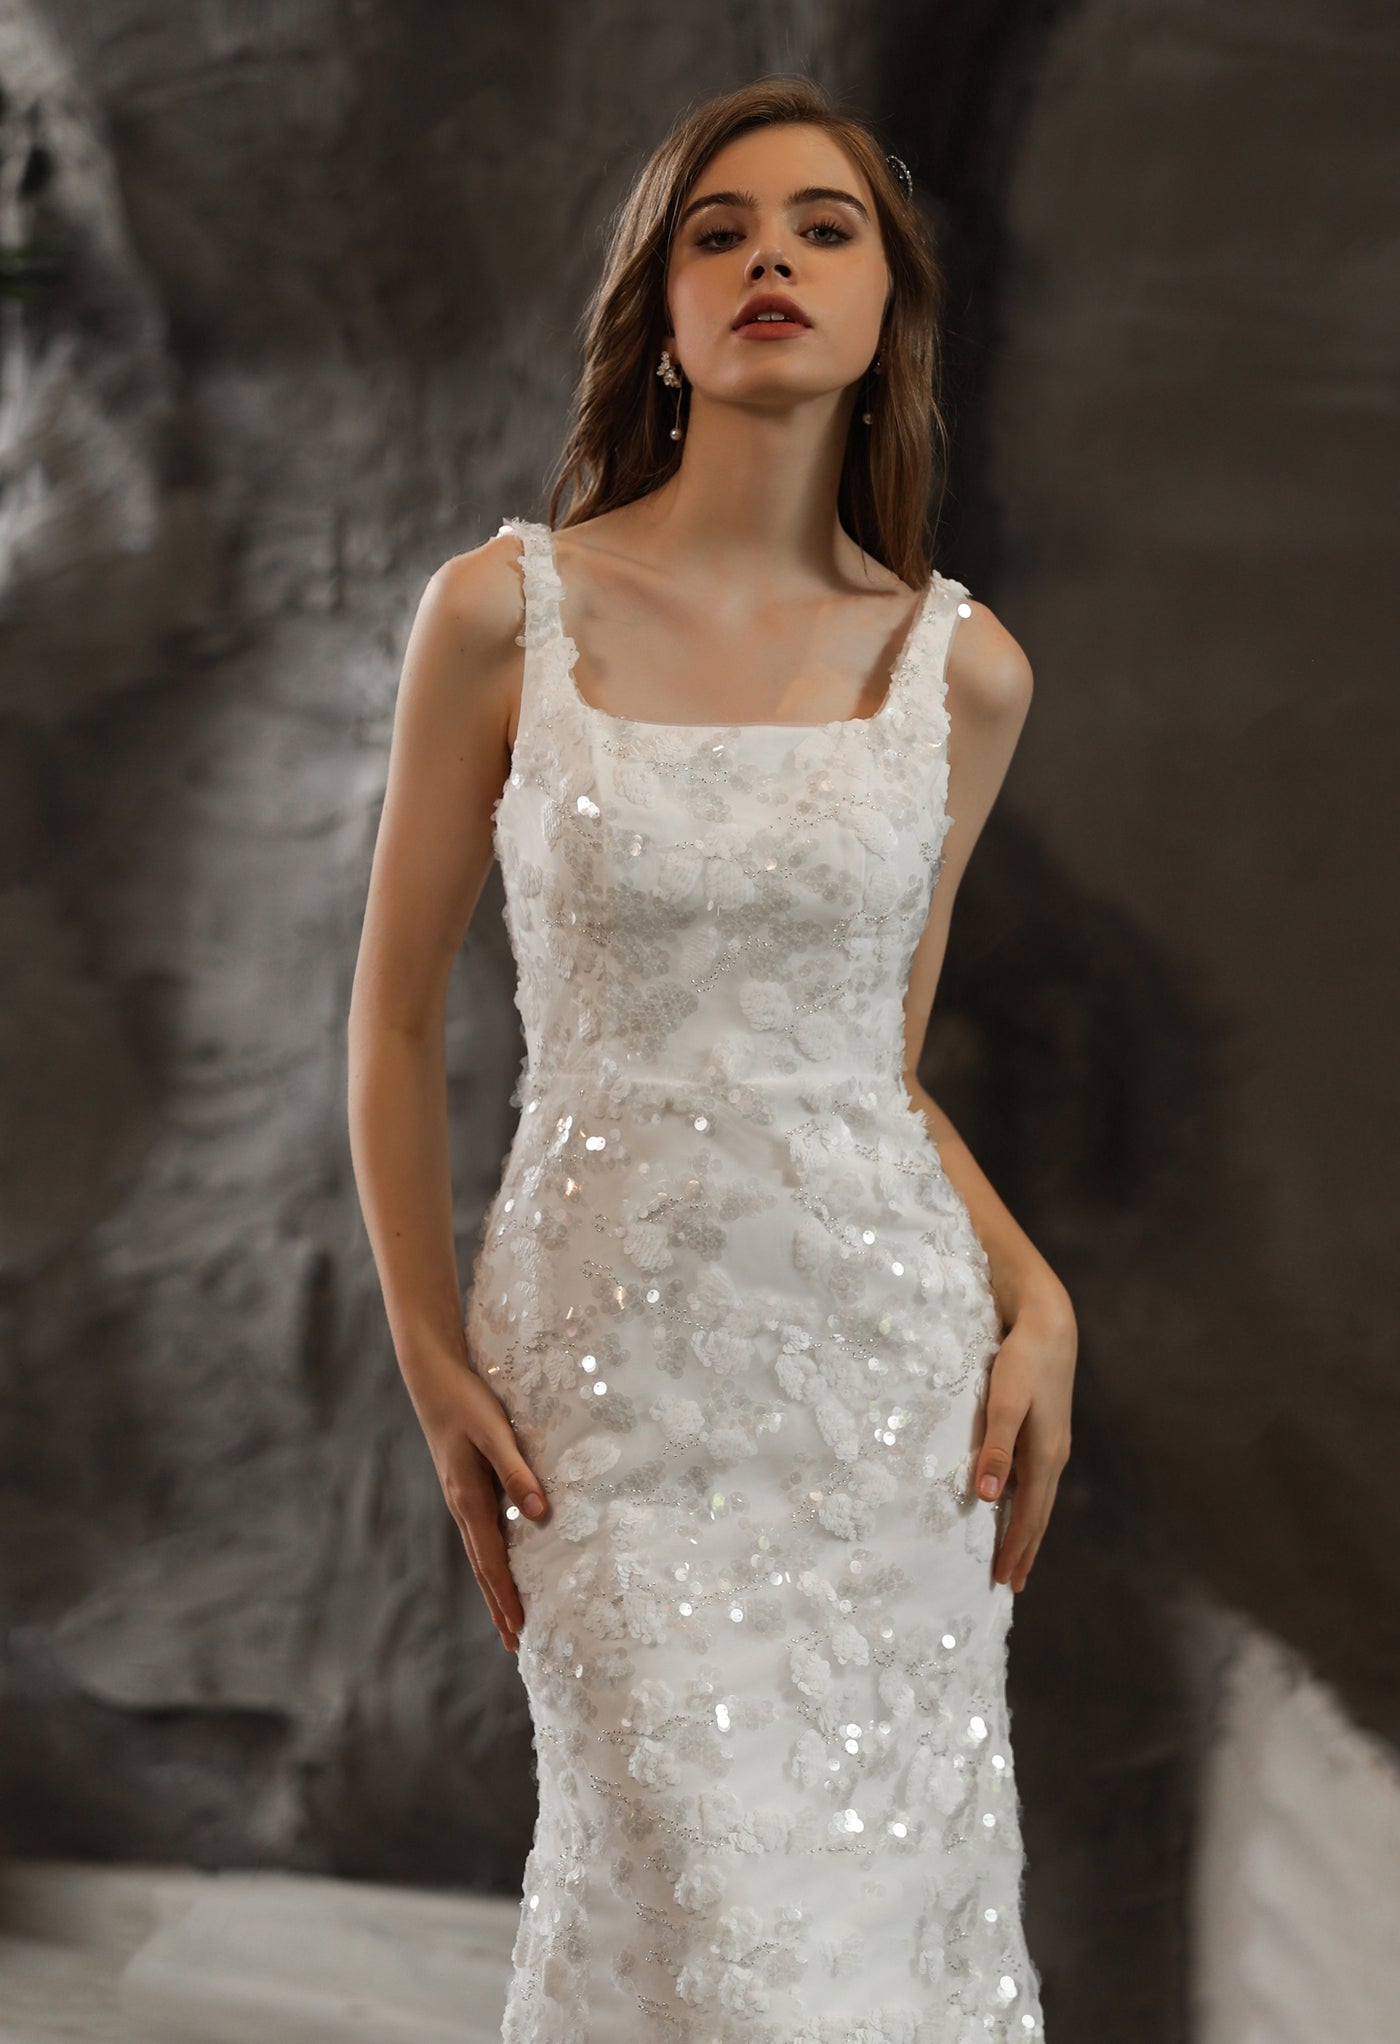 A woman in an elegant Bergamot Bridal wedding dress featuring sequined lace appliqués, posing against a textured grey background.